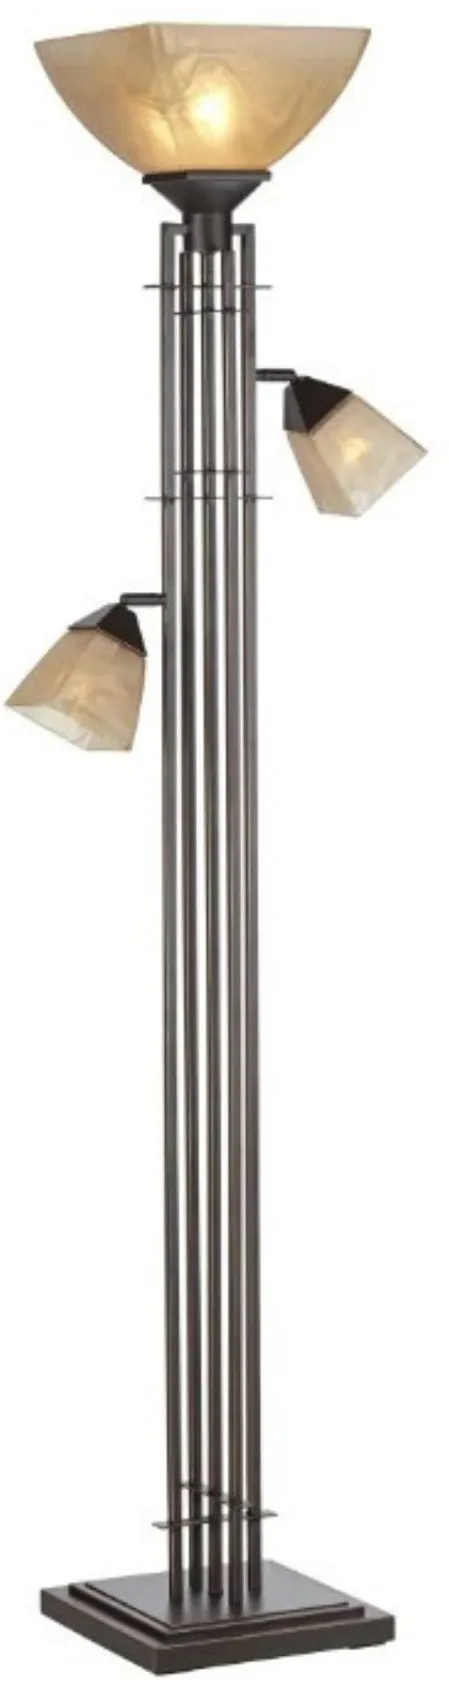 Metal Architectural Lines With 2 Reading Lights Torchiere 72"H